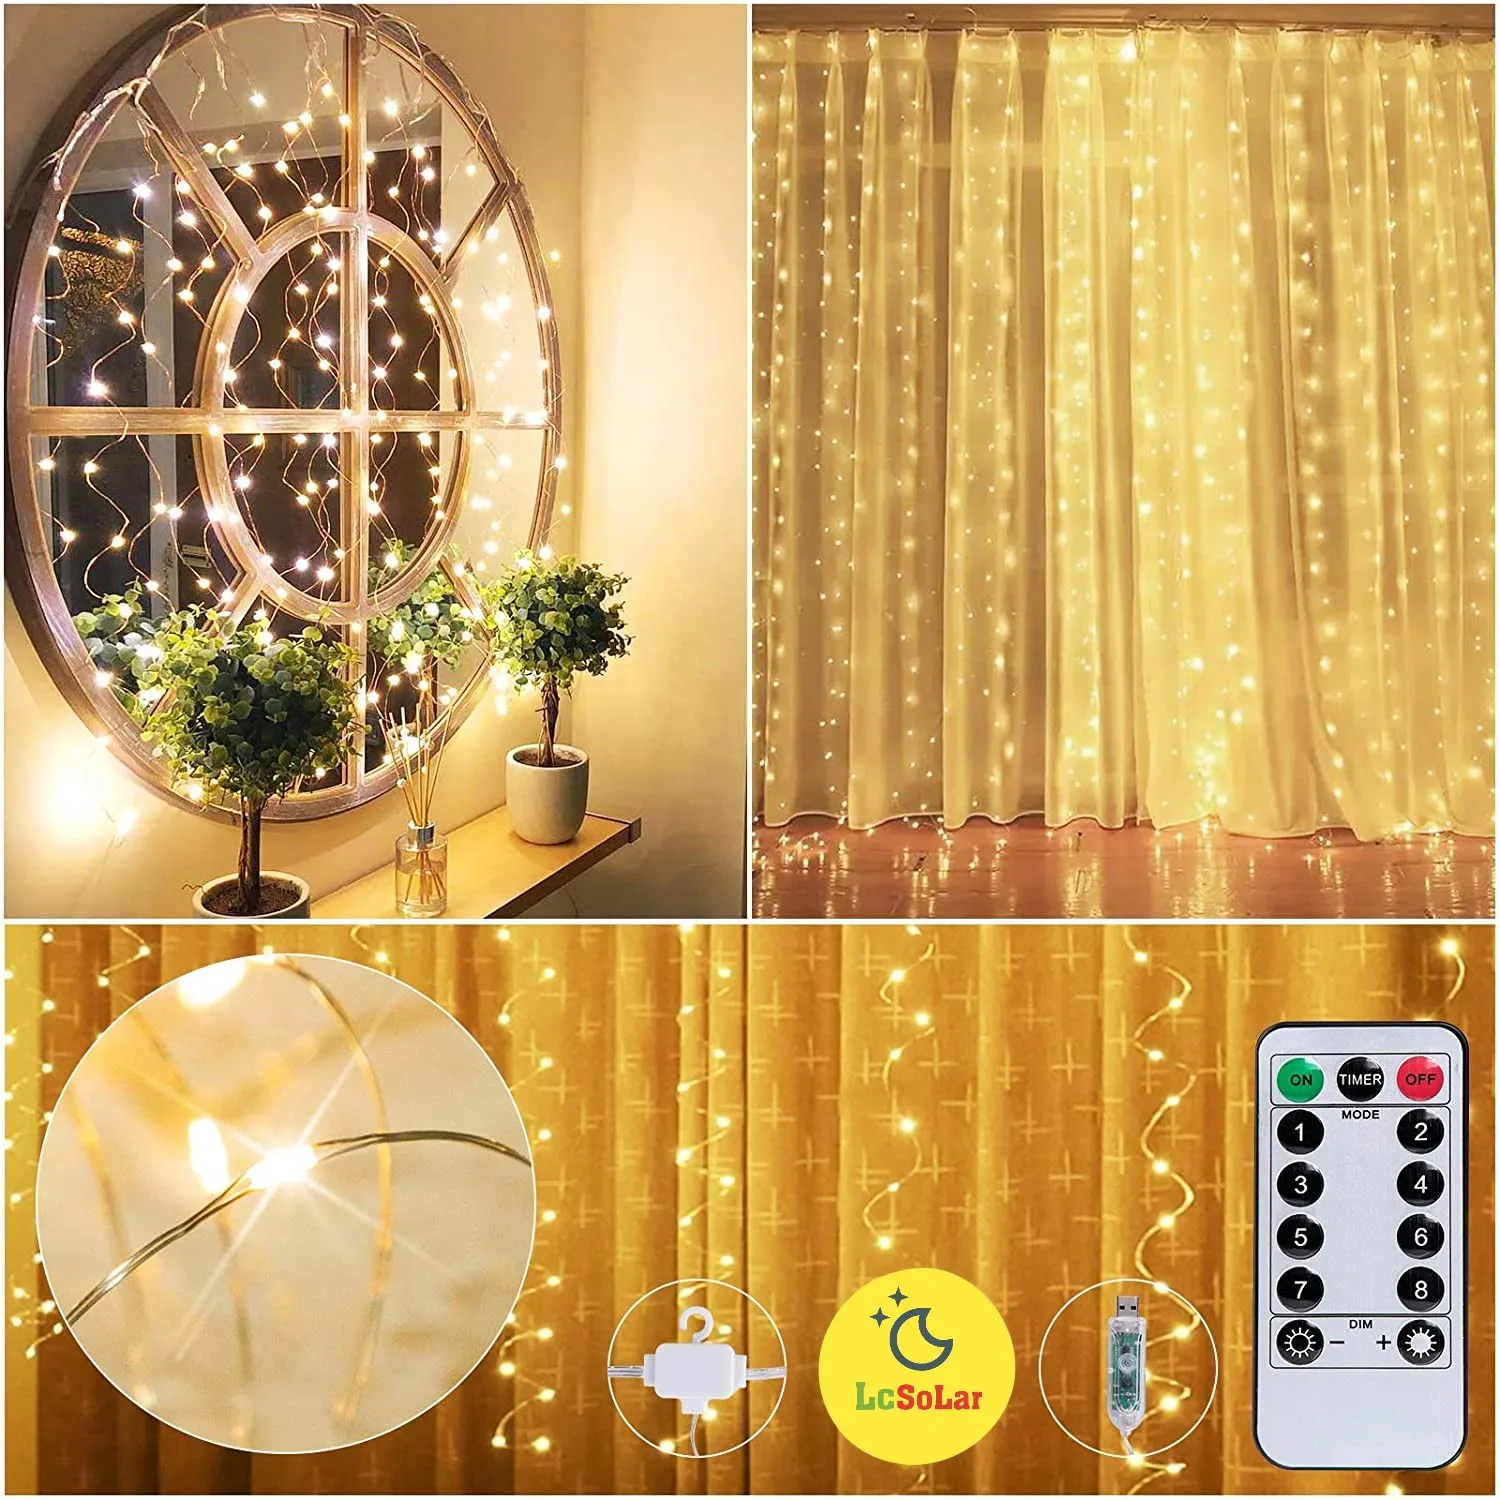 300LED Curtain Lights Dimmable 3*3M USB Adapter Window String Lights  Remote Twinkle Fairy 8 Lighting Modes for Party Bedroom